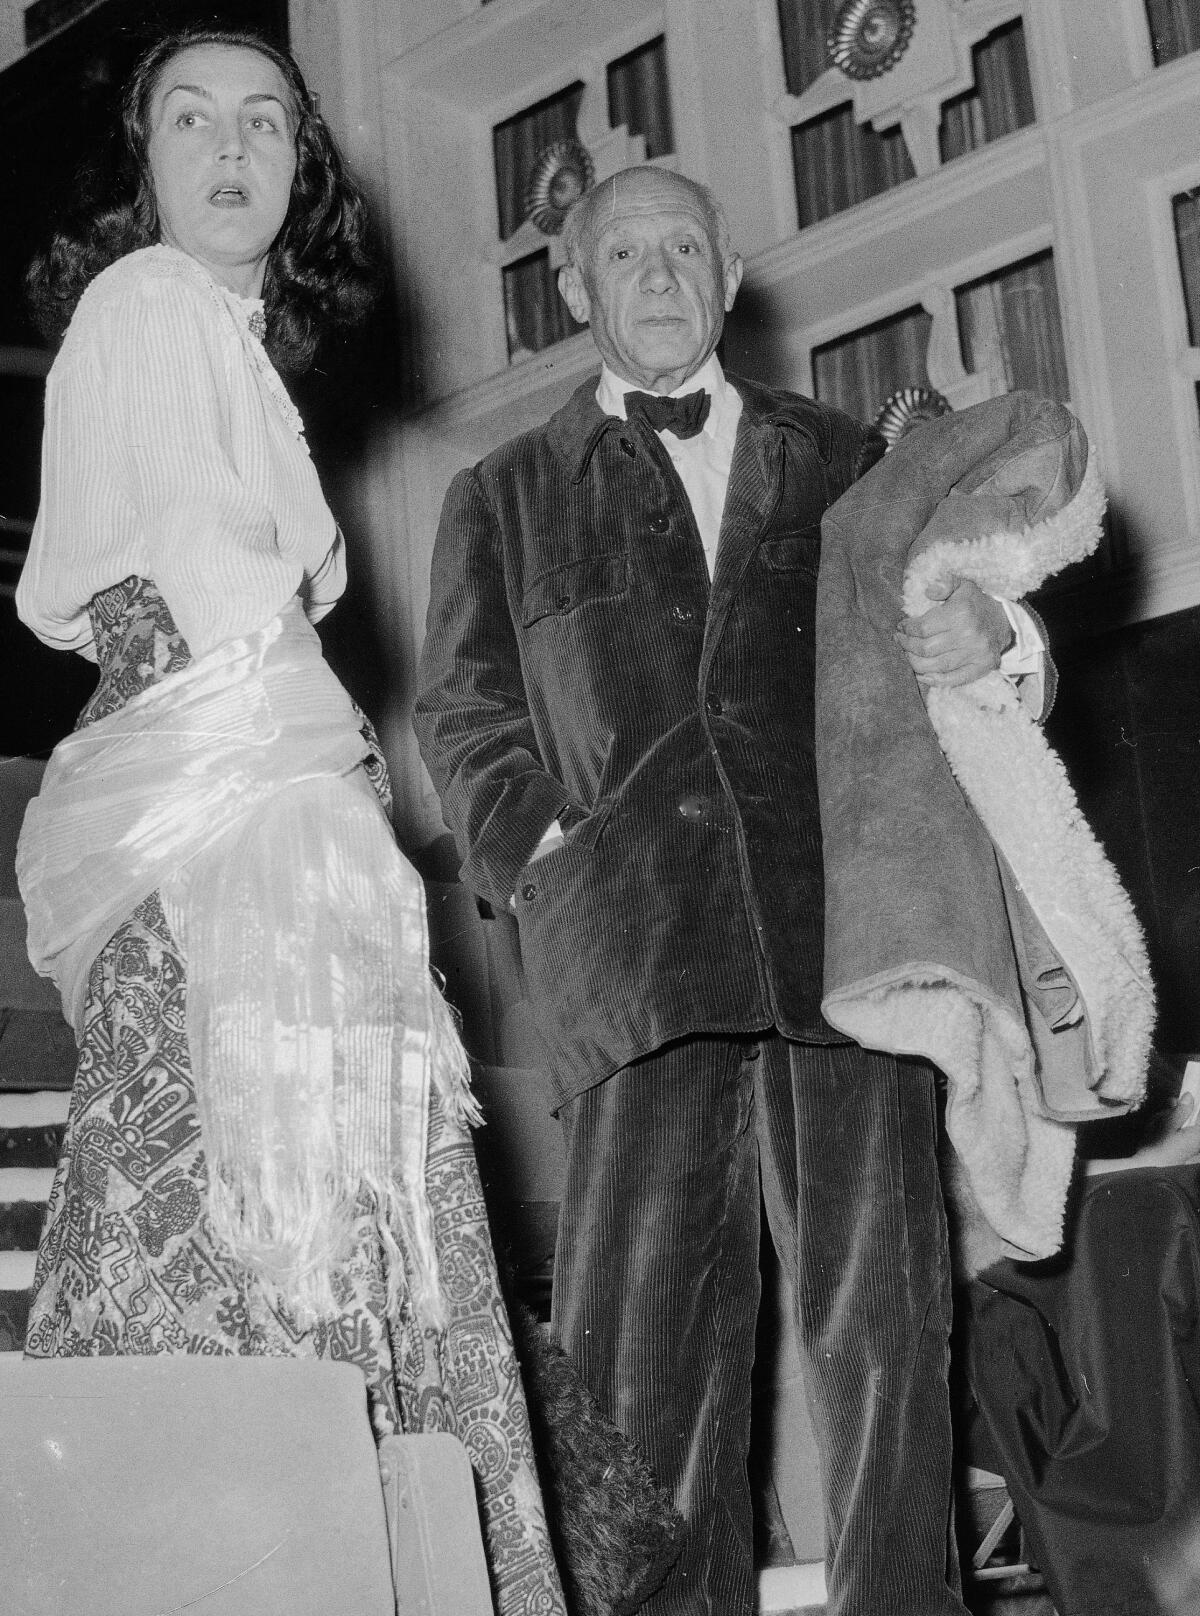 Pablo Picasso with Francoise Gilot at Cannes Film Festival in 1953